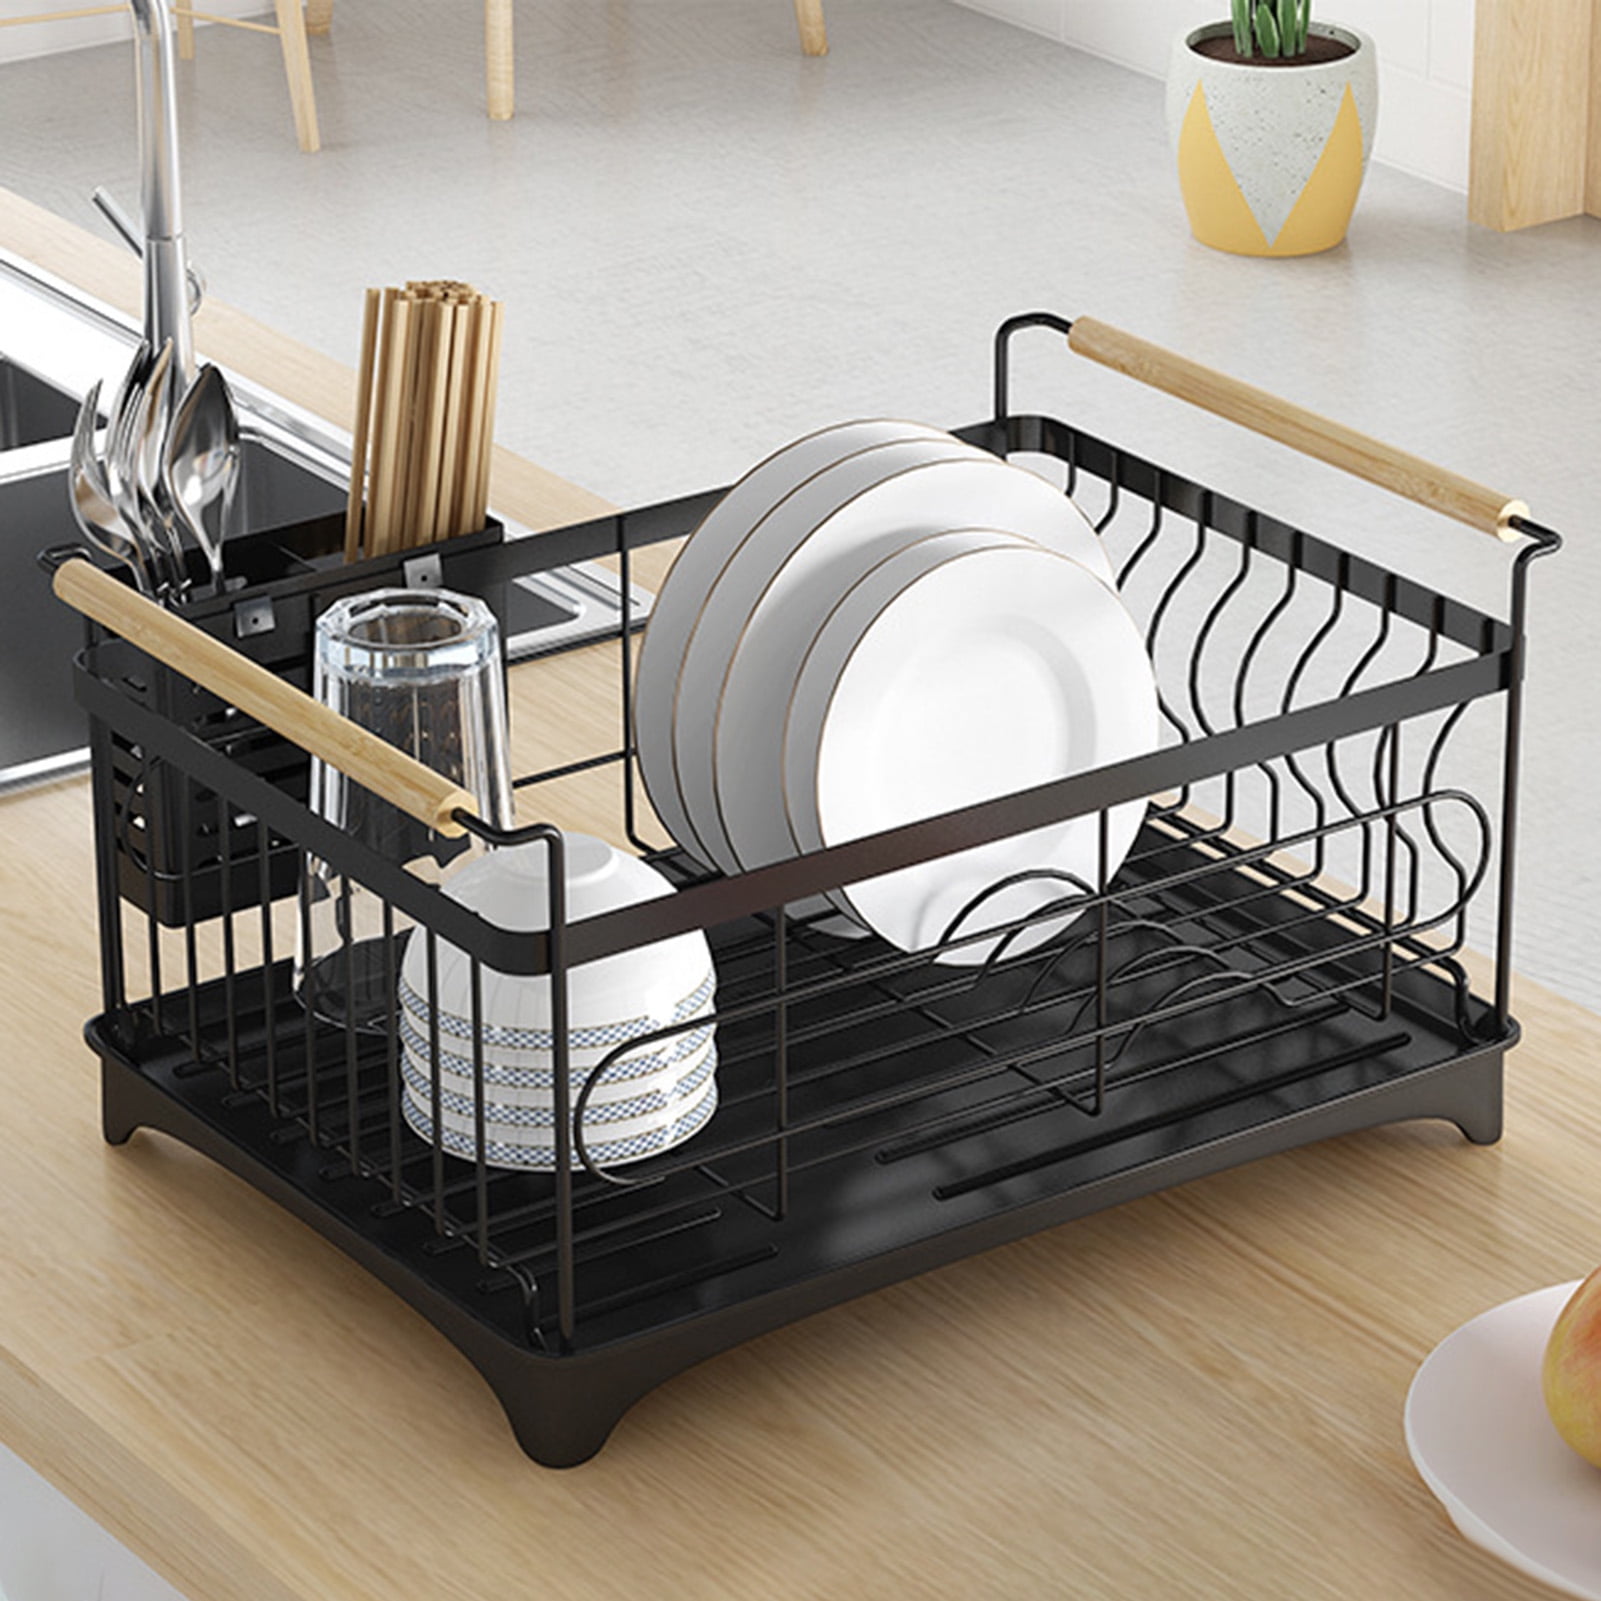 Jaq Small Dish Drying Rack in Sink Adjustable 14.96 to 20.59, Expandable 304 Stainless Steel Metal Dish Drainer Rack Organizer with Stainless